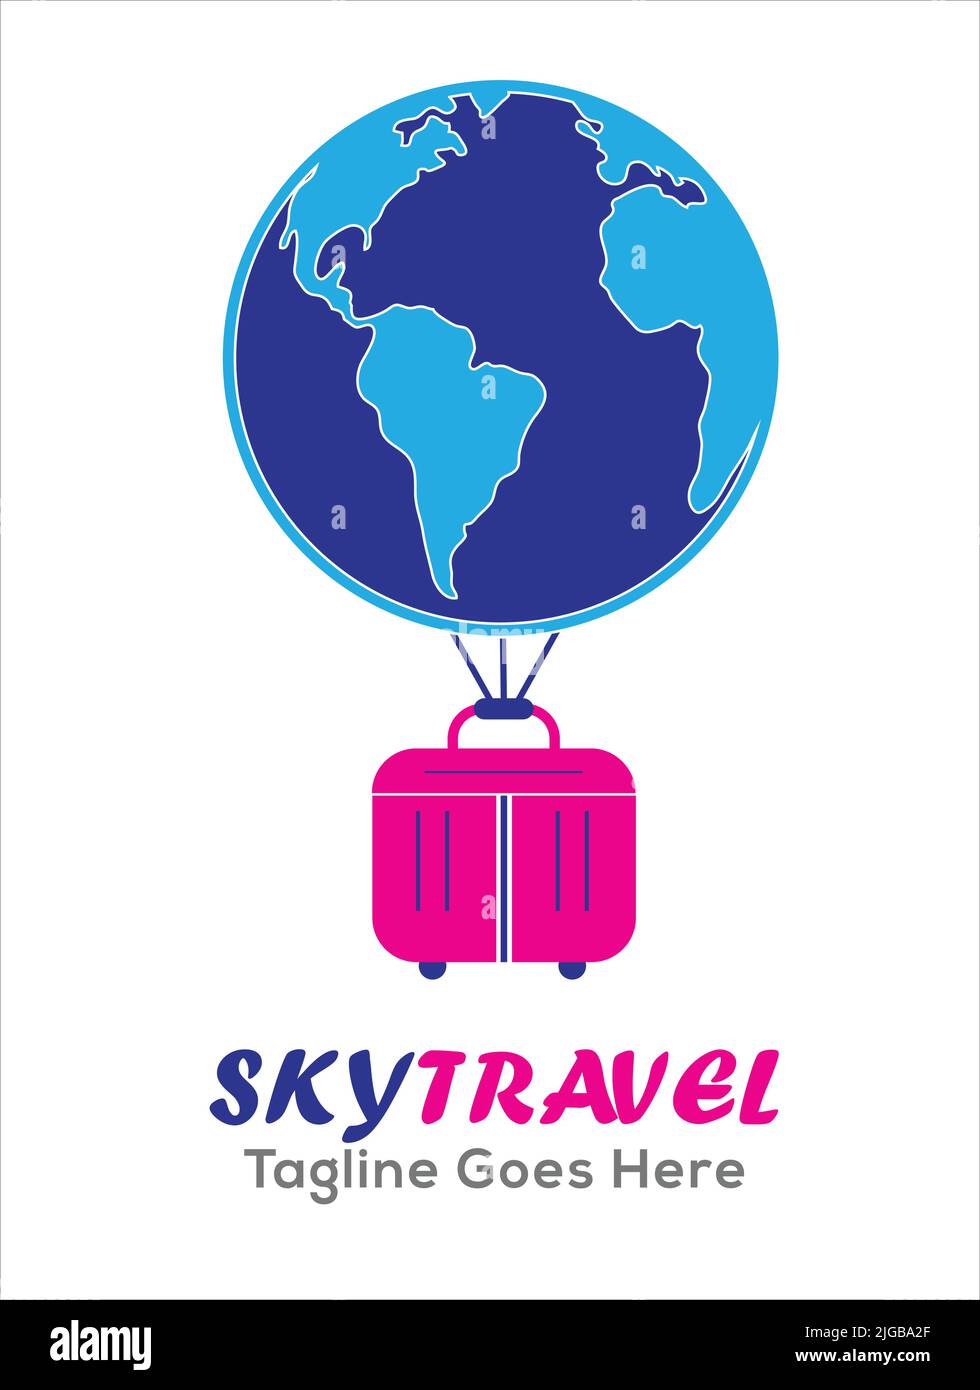 traveling company logo tourism logo with suitcase icon symbol vector Stock Vector